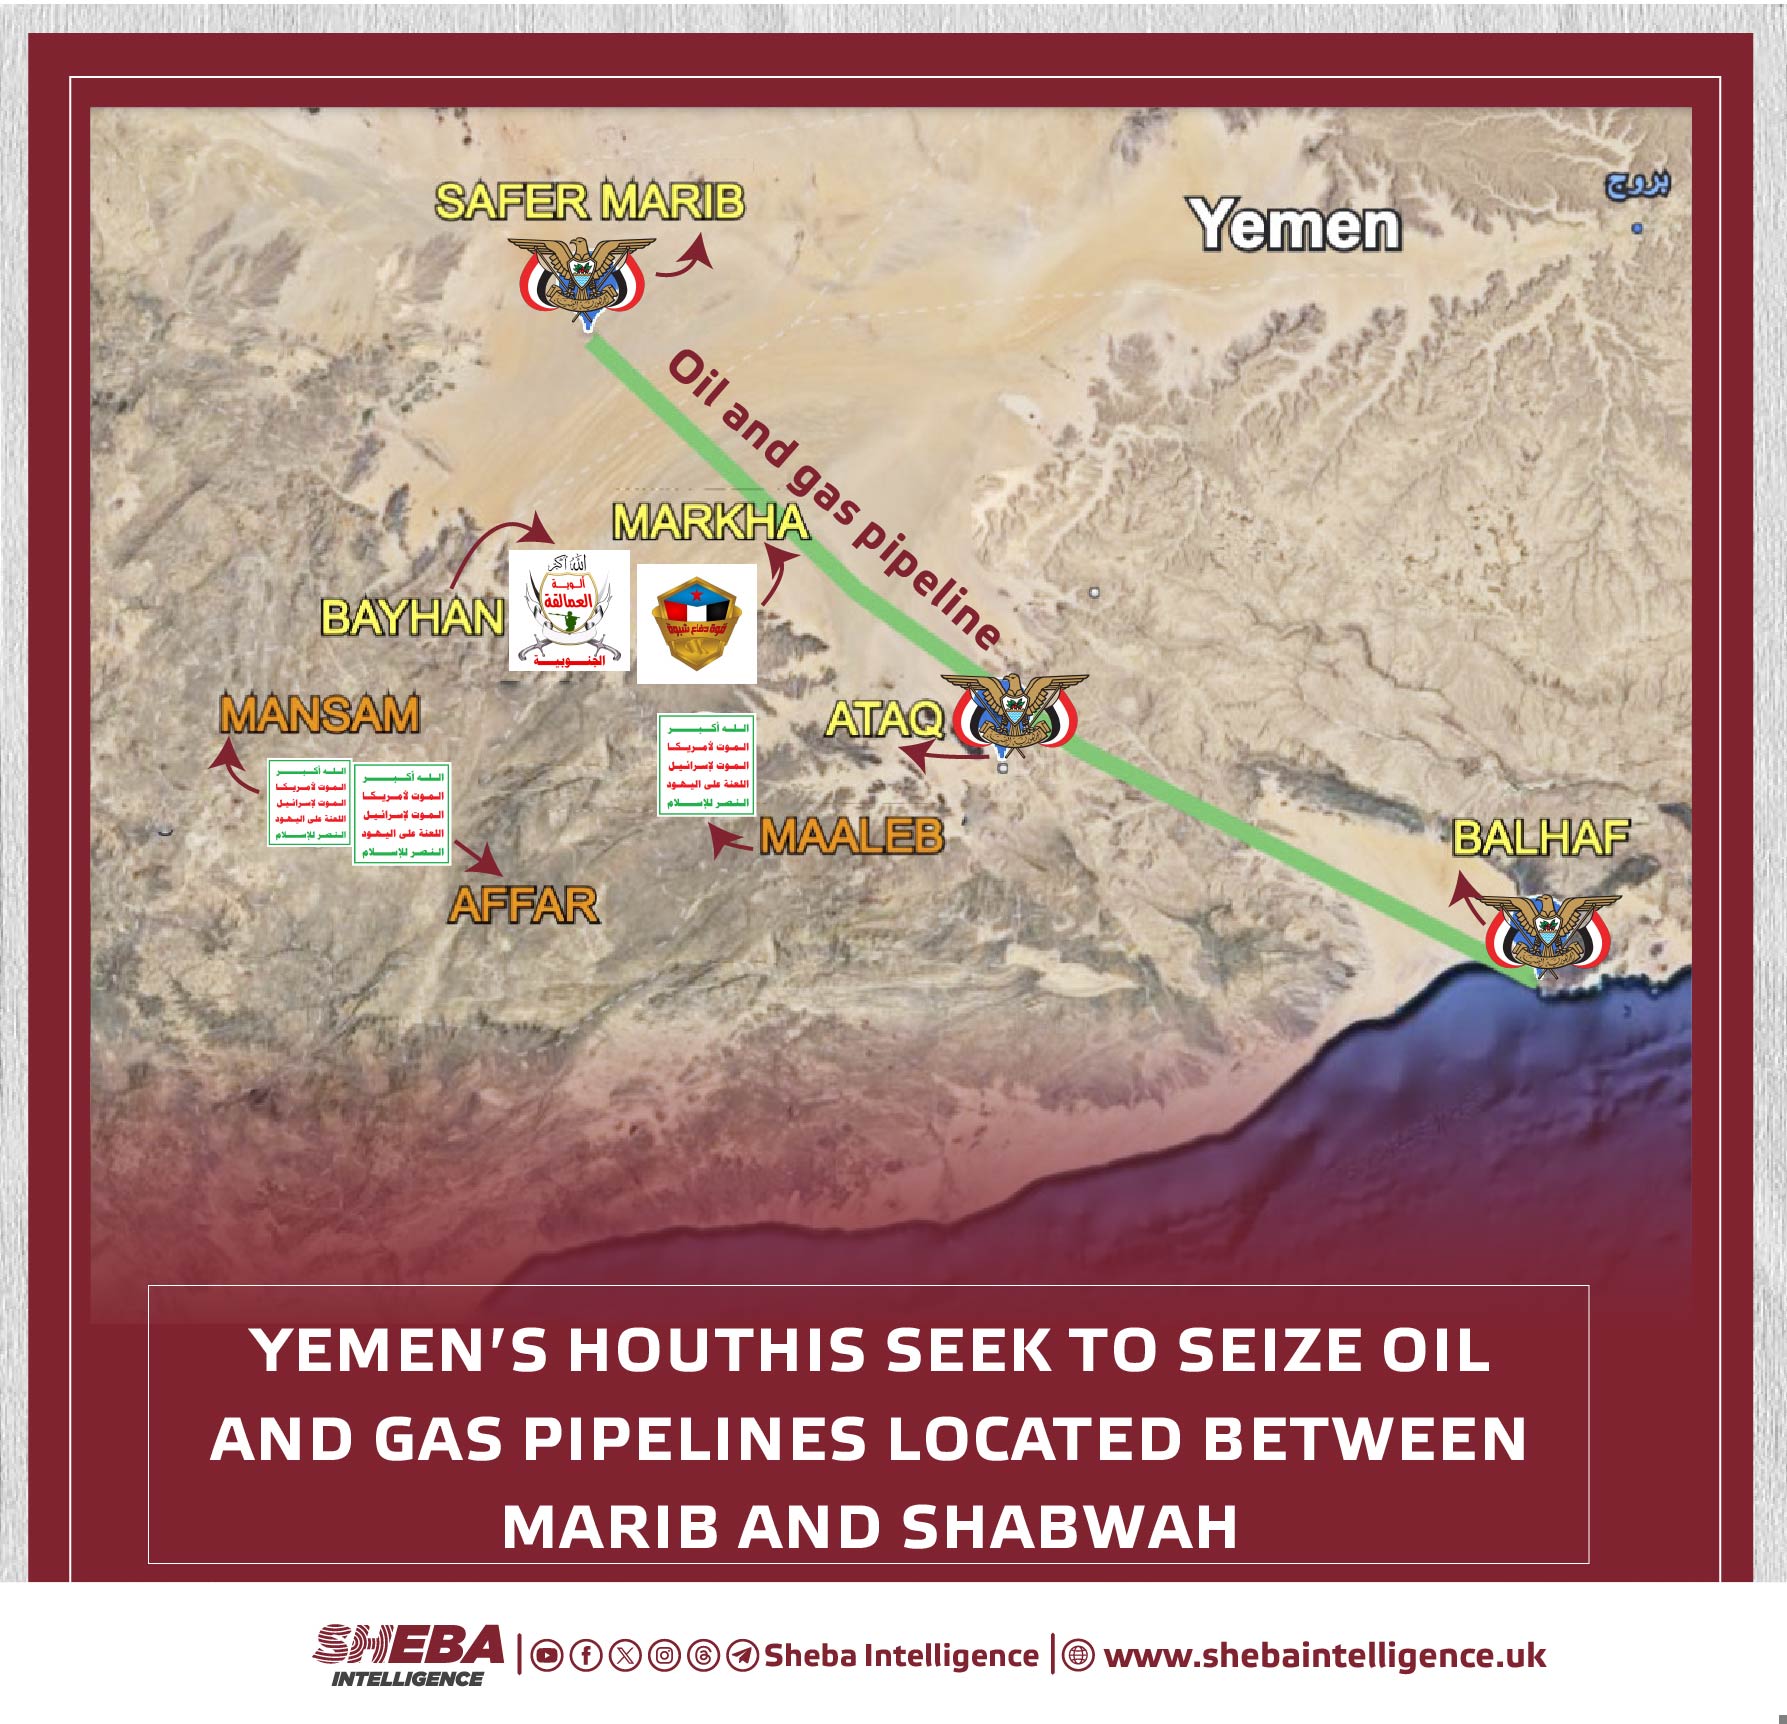 Yemen's Houthis Seek to Seize Oil and Gas Pipelines Located Between Marib and Shabwah